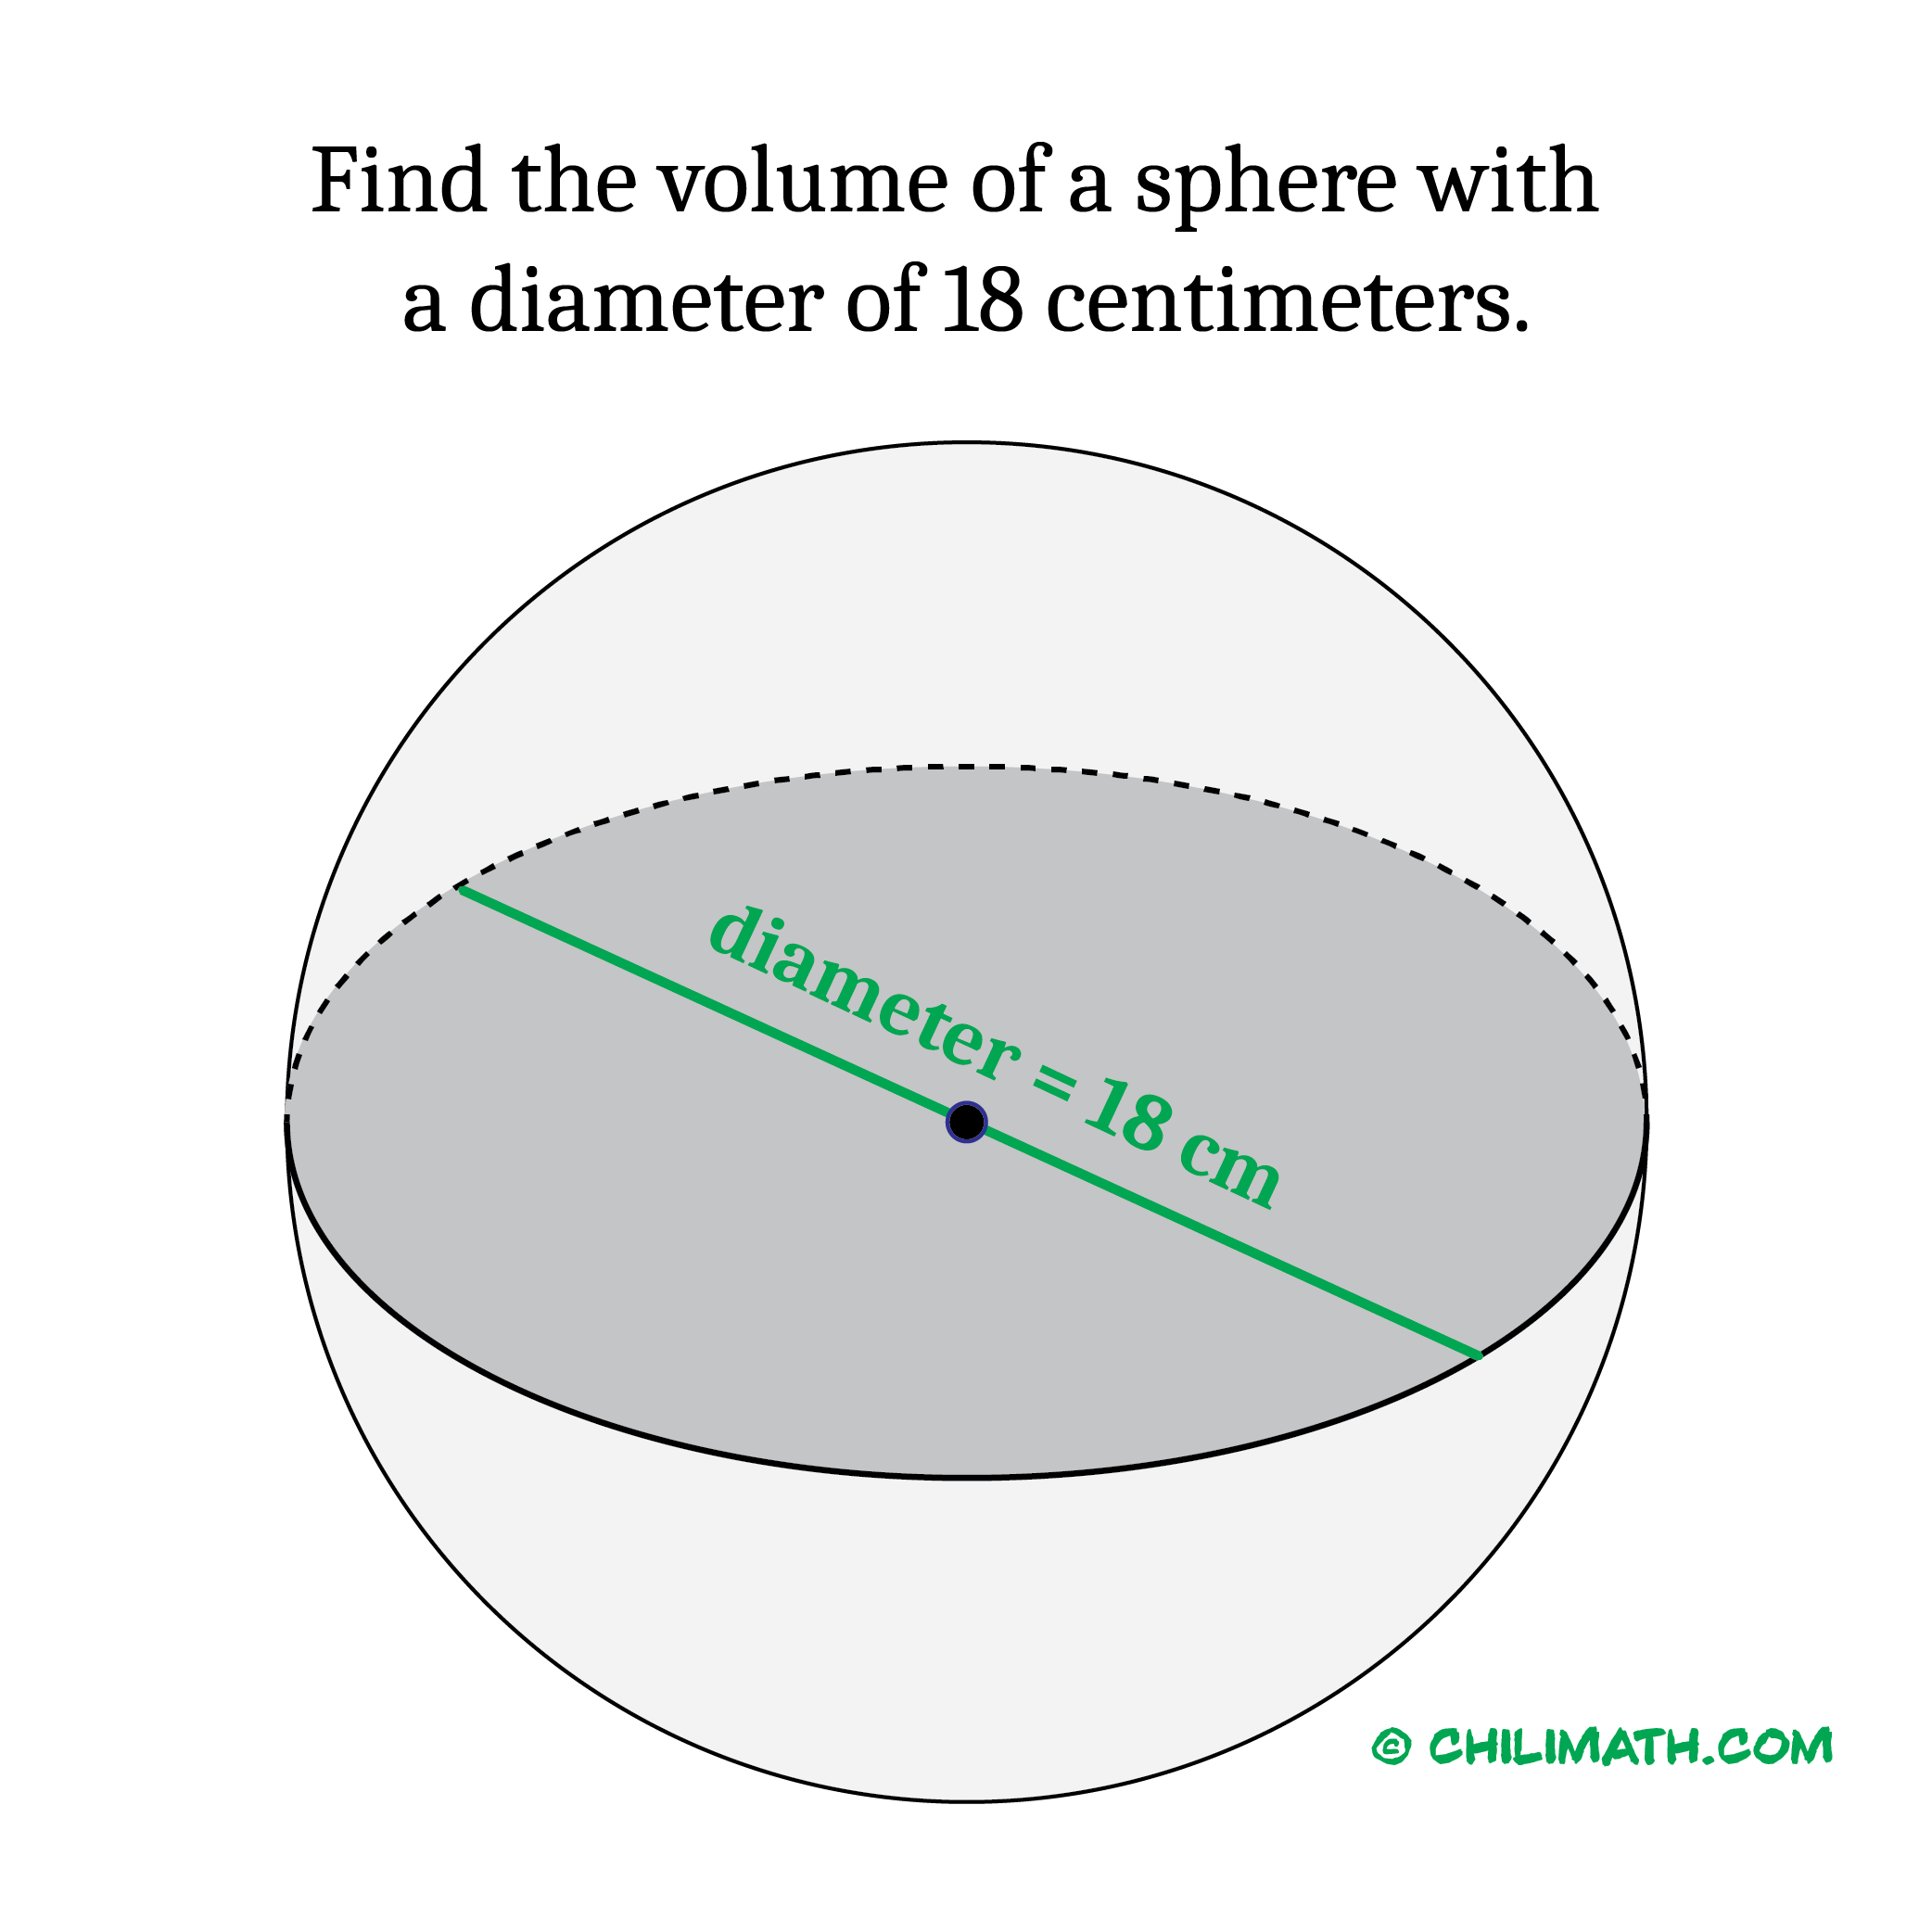 a gray sphere having a diameter of 18 centimeter find its volume